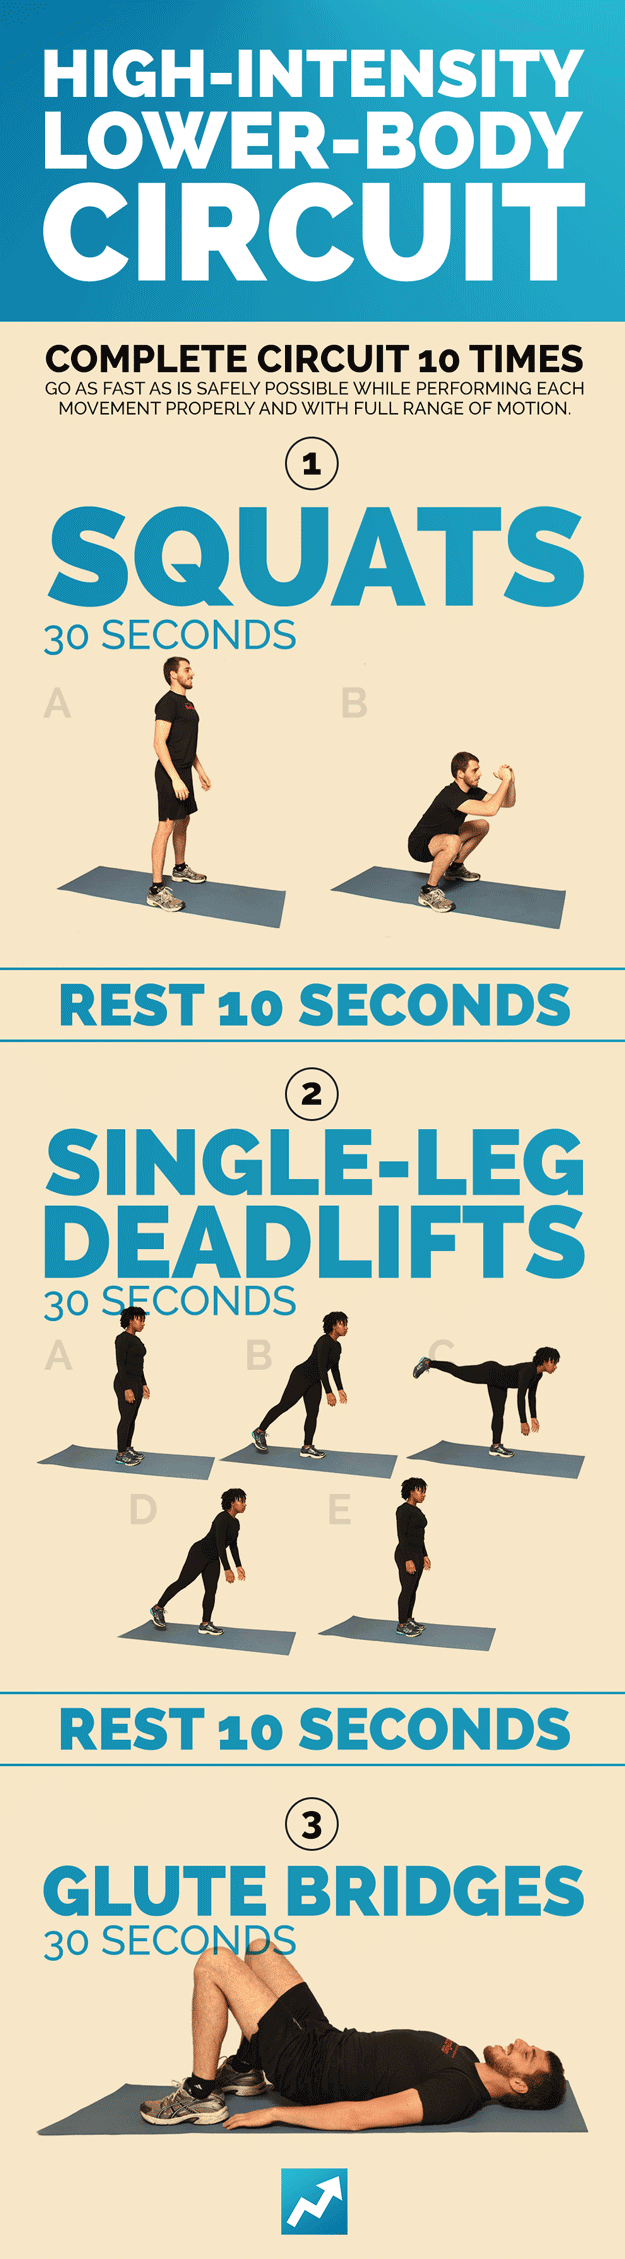 13 Best Full-Body Exercises To Do Without Equipment, According to